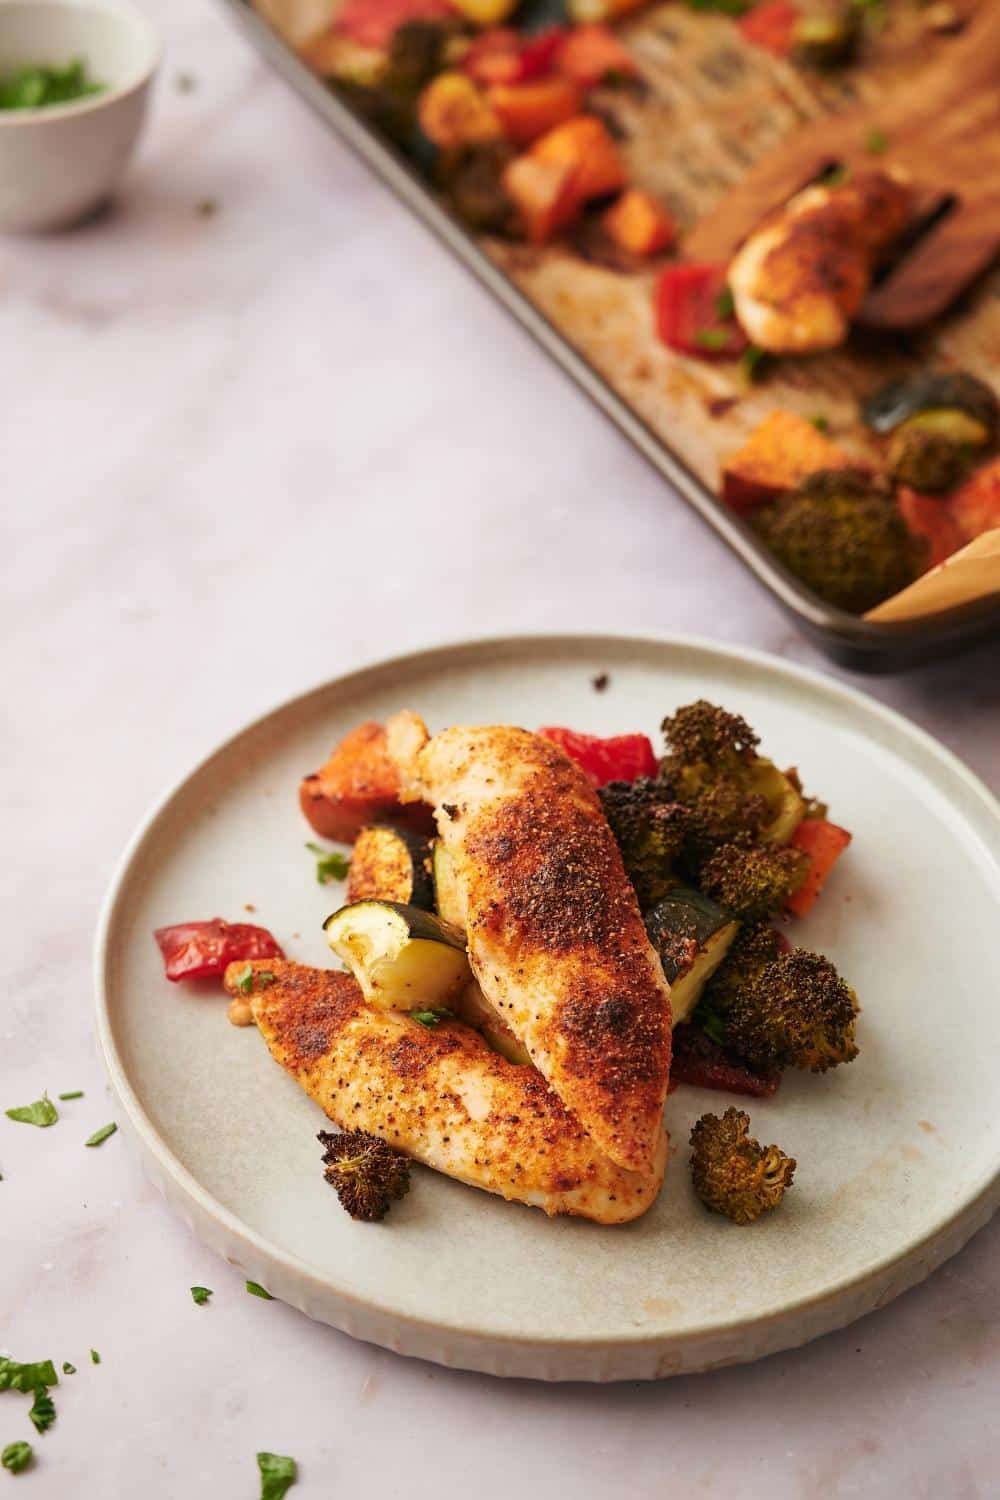 Baked chicken tenderloins on top of roasted chopped veggies on a plate. They're garnished with herbs, some of which are delicately scattered on the table top. Part of a bowl of herbs and a parchment paper lined baking sheet with more chicken and veggies can be seen in the back.